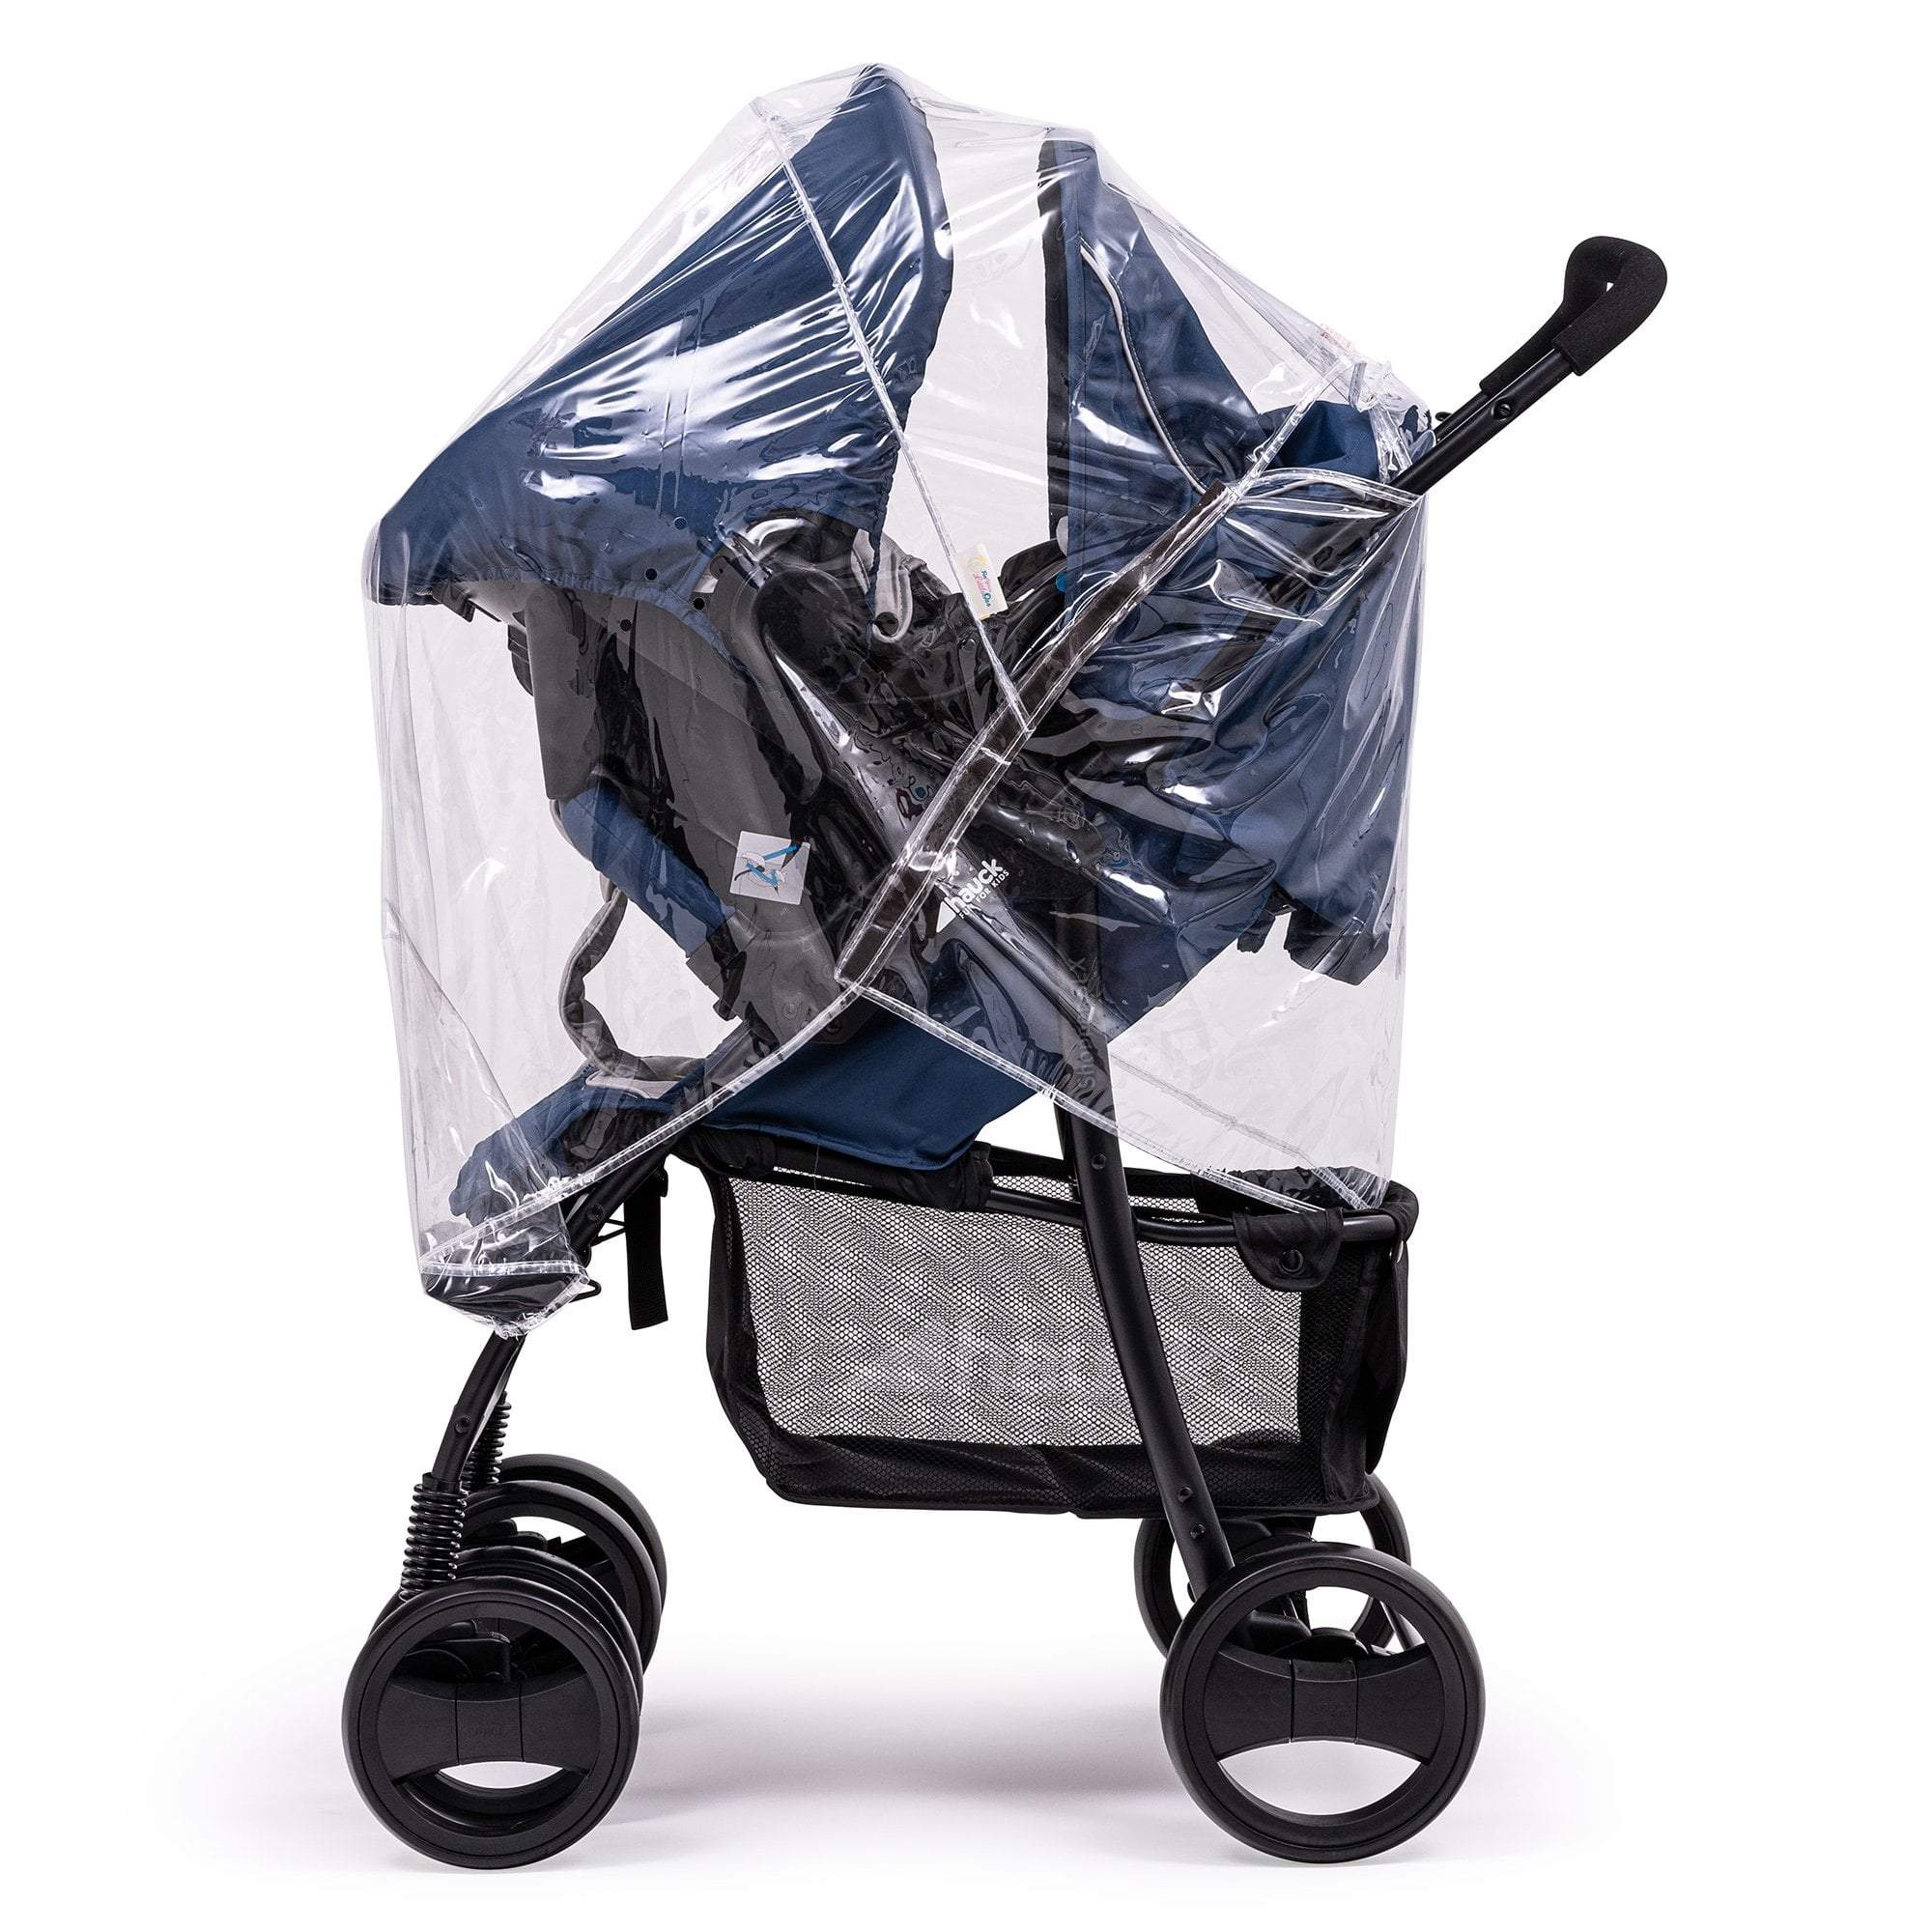 Travel System Raincover Compatible with Doona - Fits All Models - For Your Little One